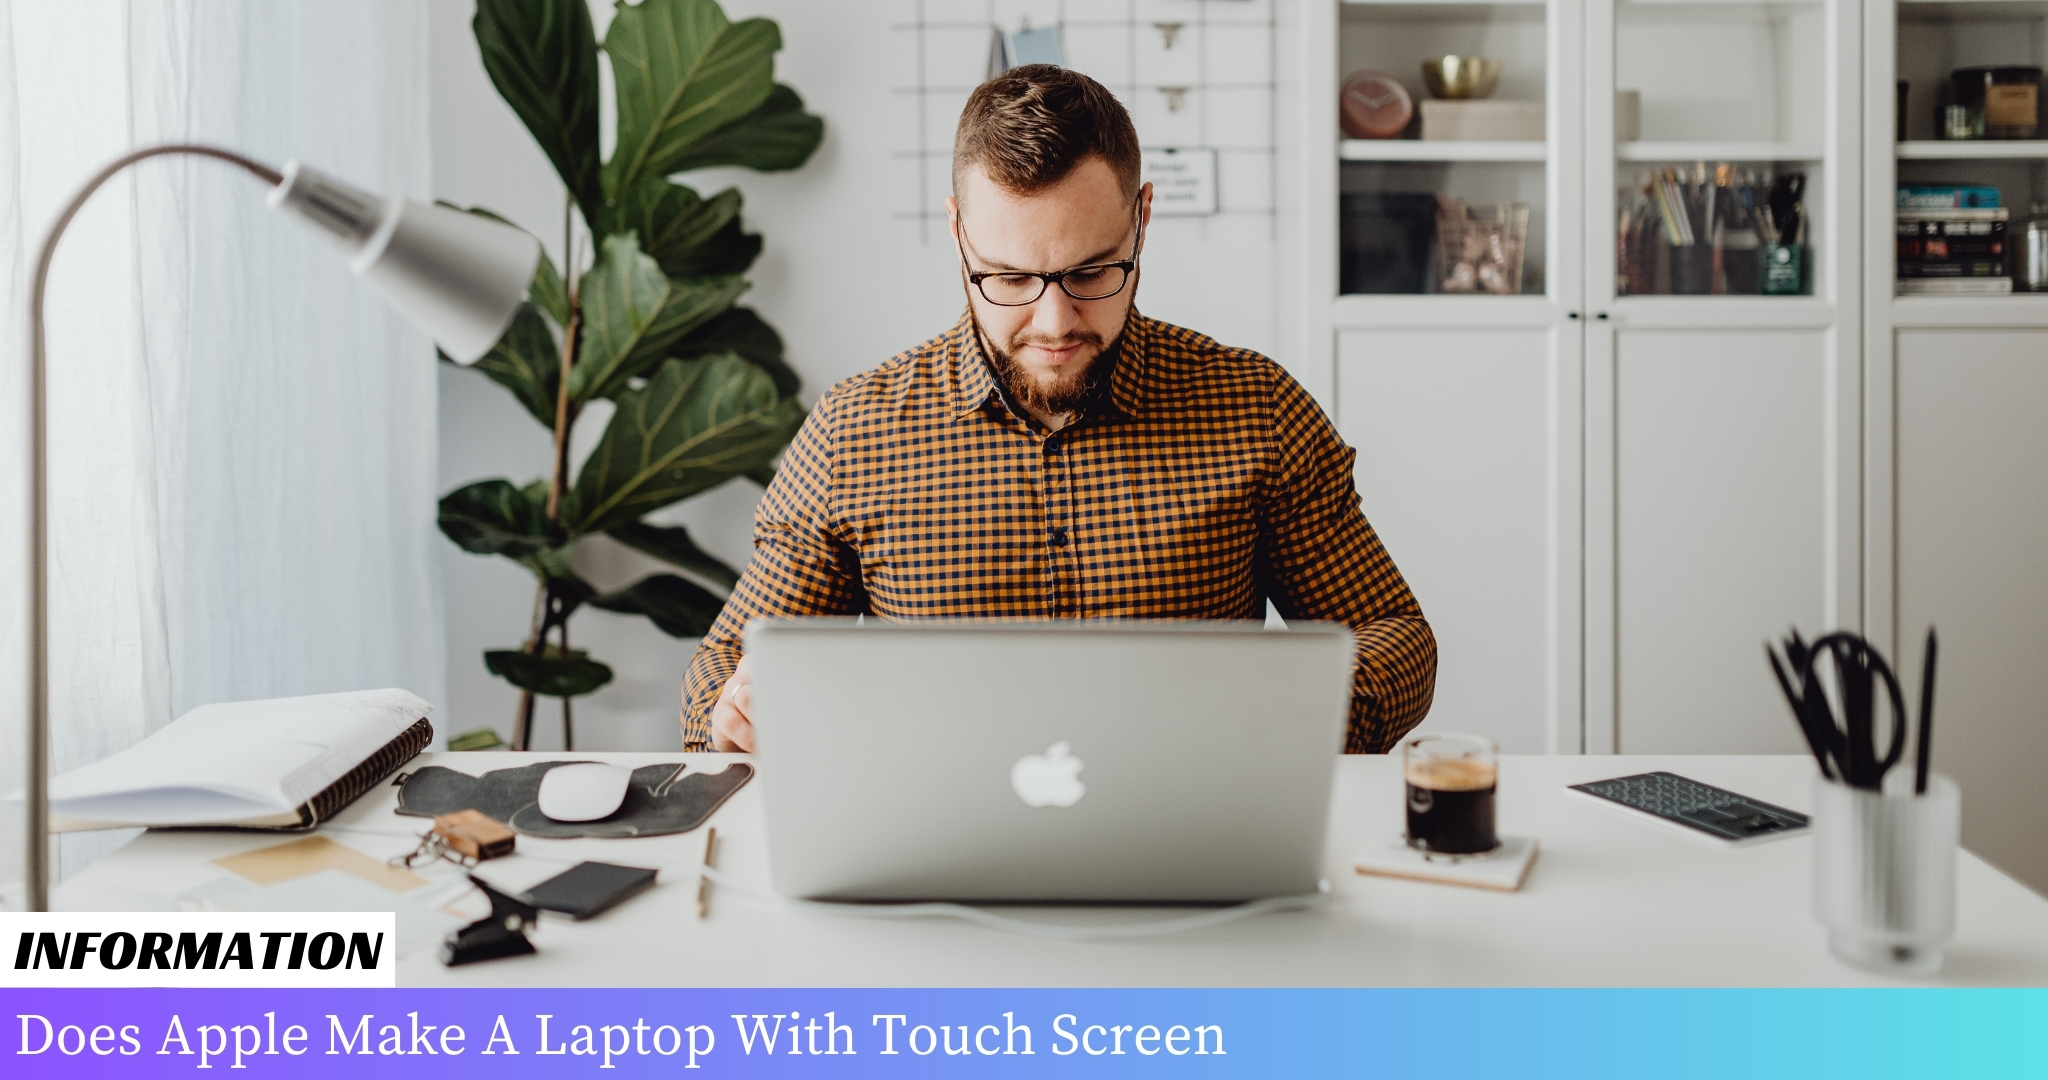 A step-by-step guide on creating a touch screen laptop. Learn the process of adding touch functionality to a regular laptop.